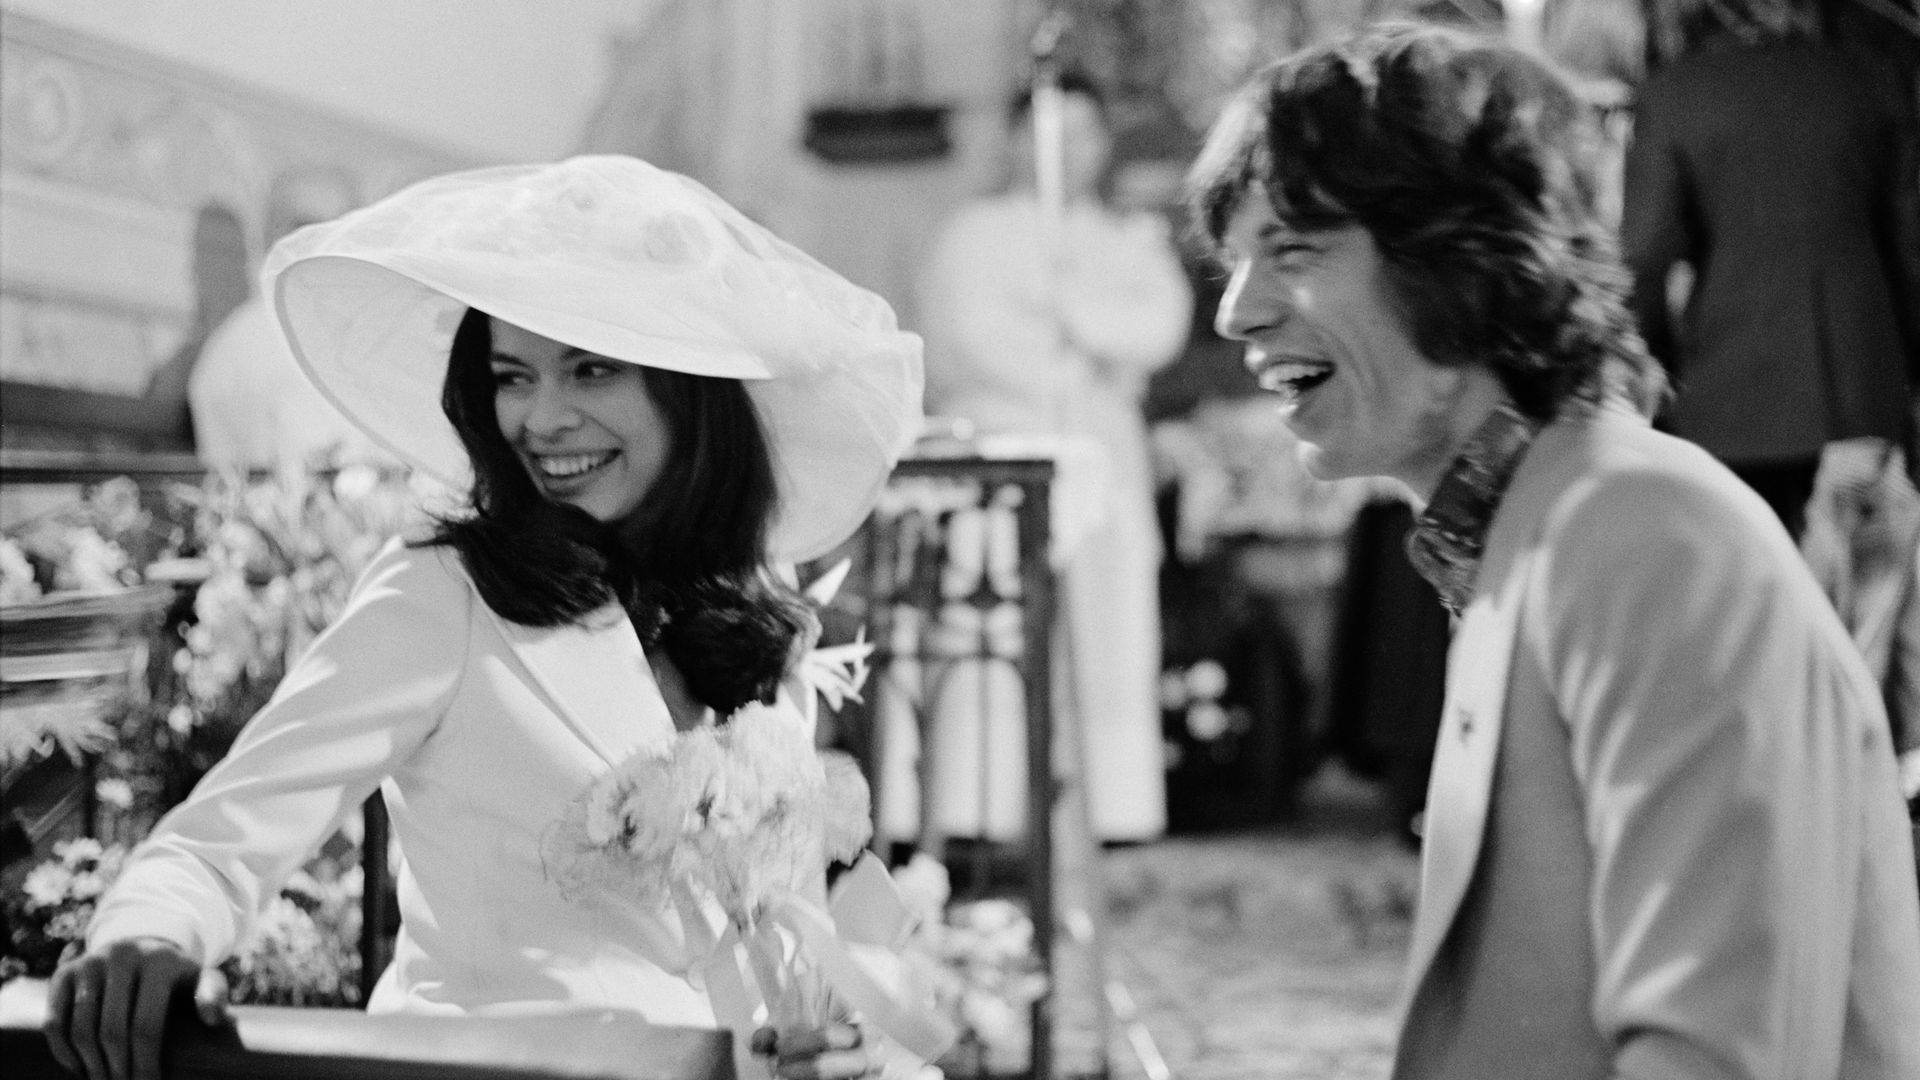 Mick and Bianca Jagger at their wedding at the Church of St. Anne, St Tropez, 12th May 1971.